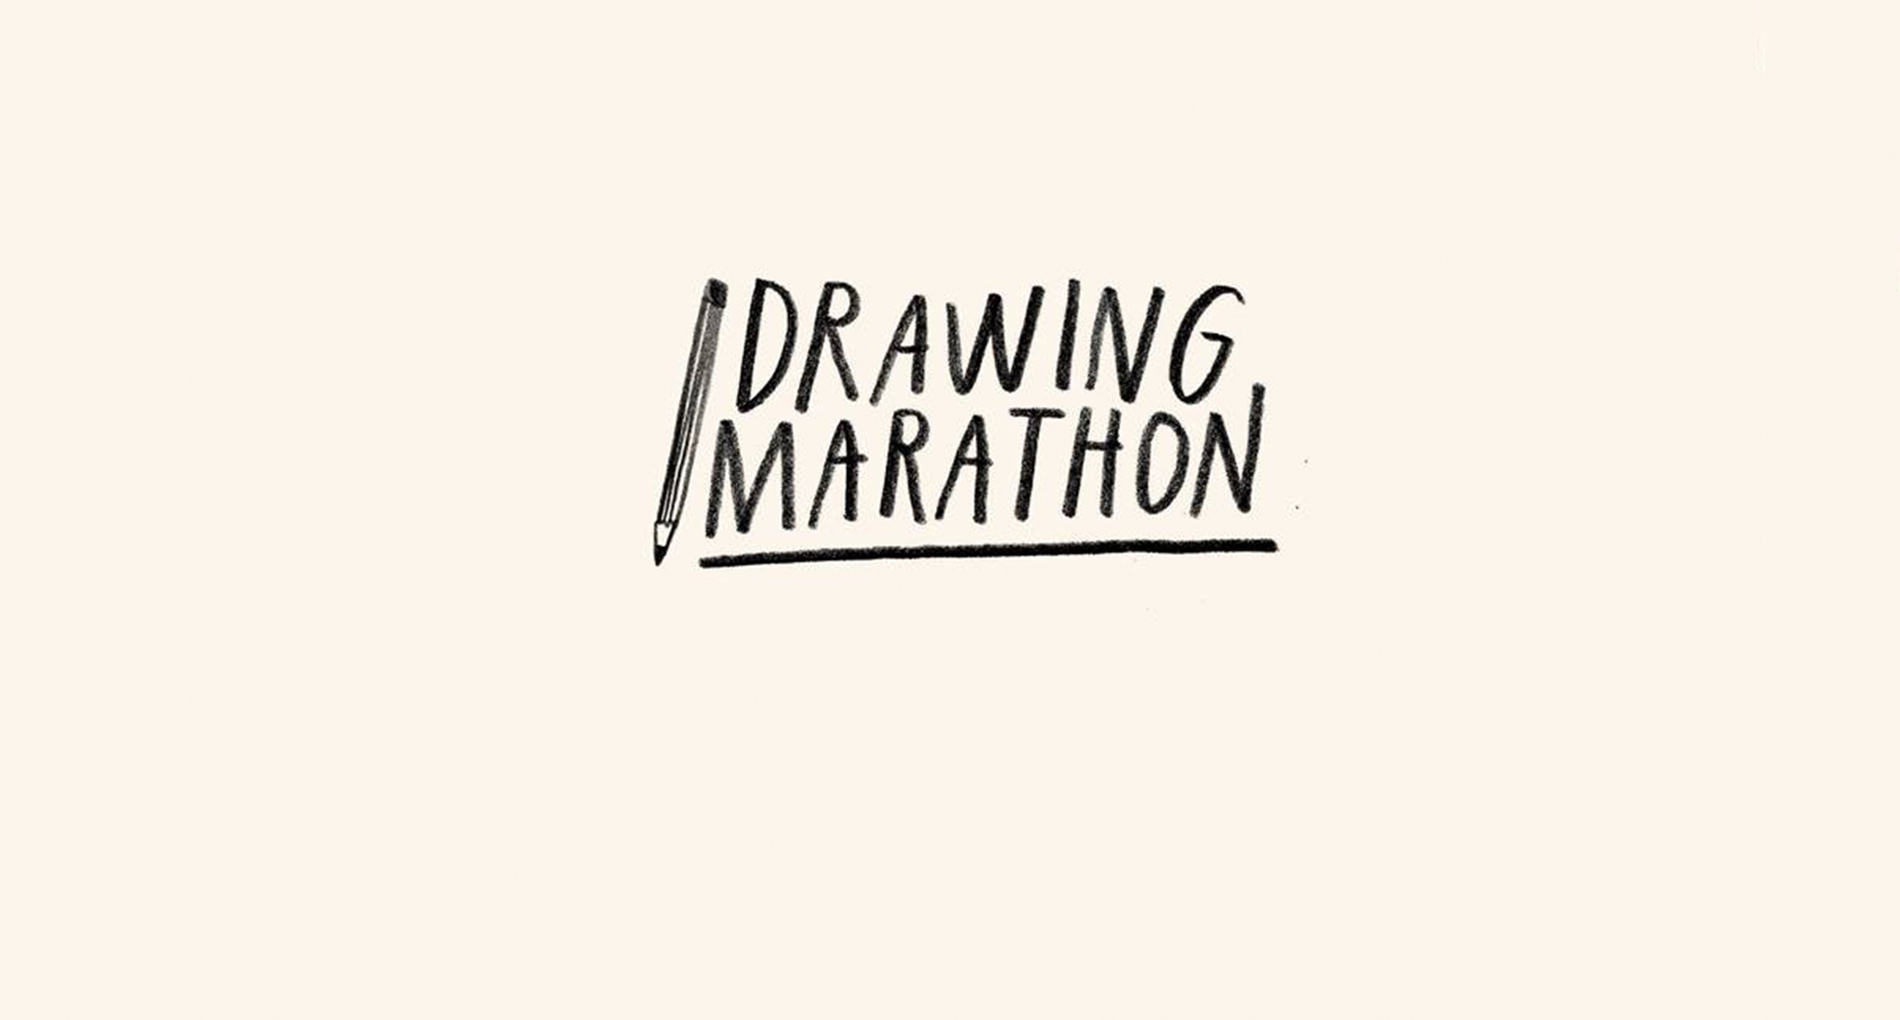 sketch that says 'drawing marathon' with a pencil on the left'